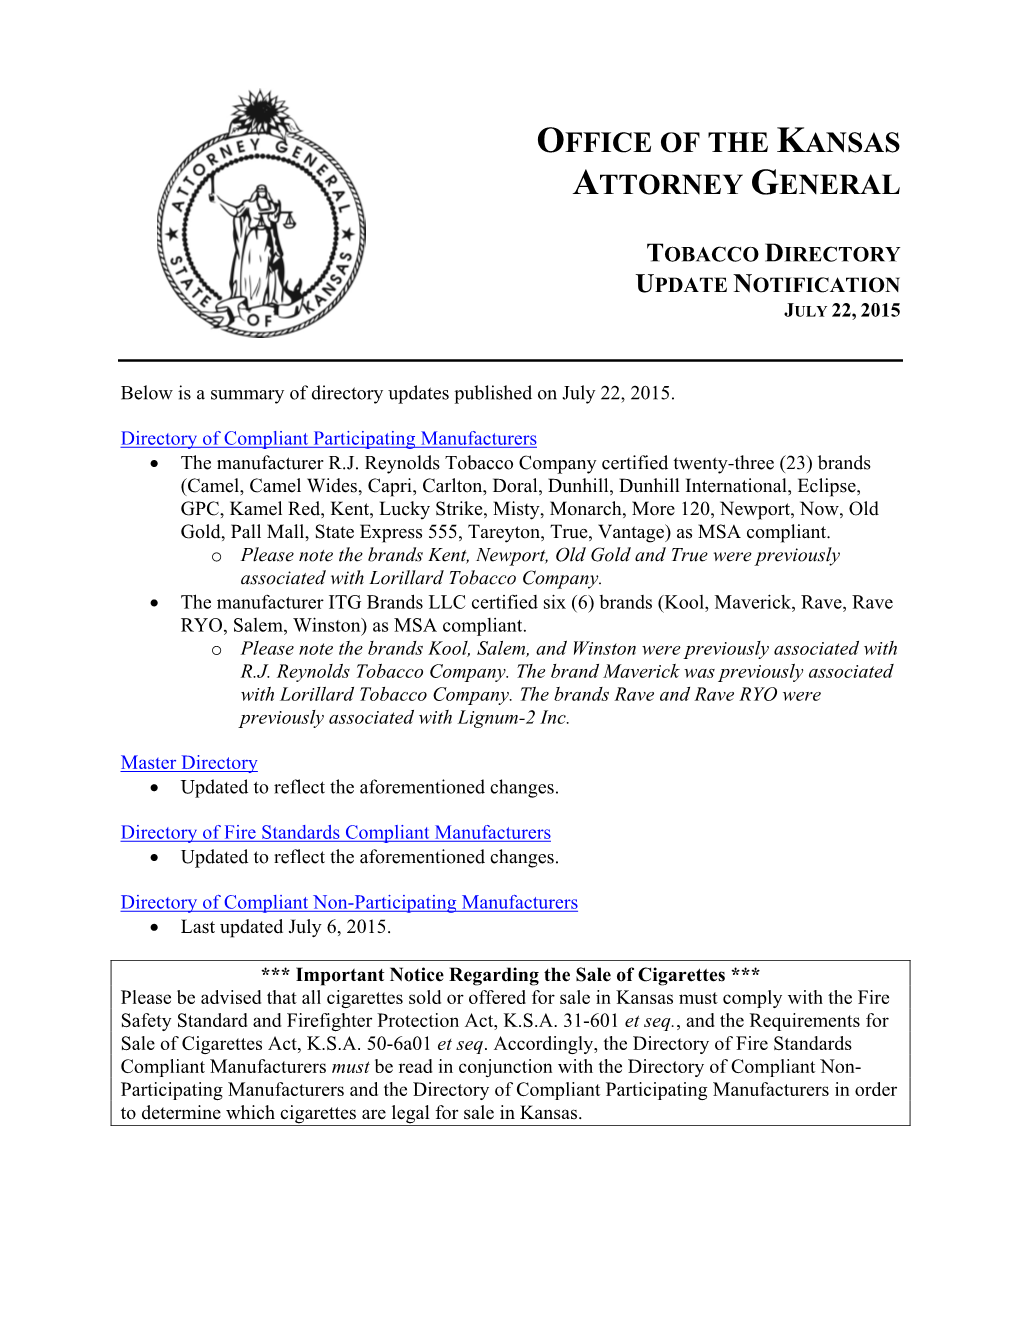 Office of the Kansas Attorney General Tobacco Directory Update Notification